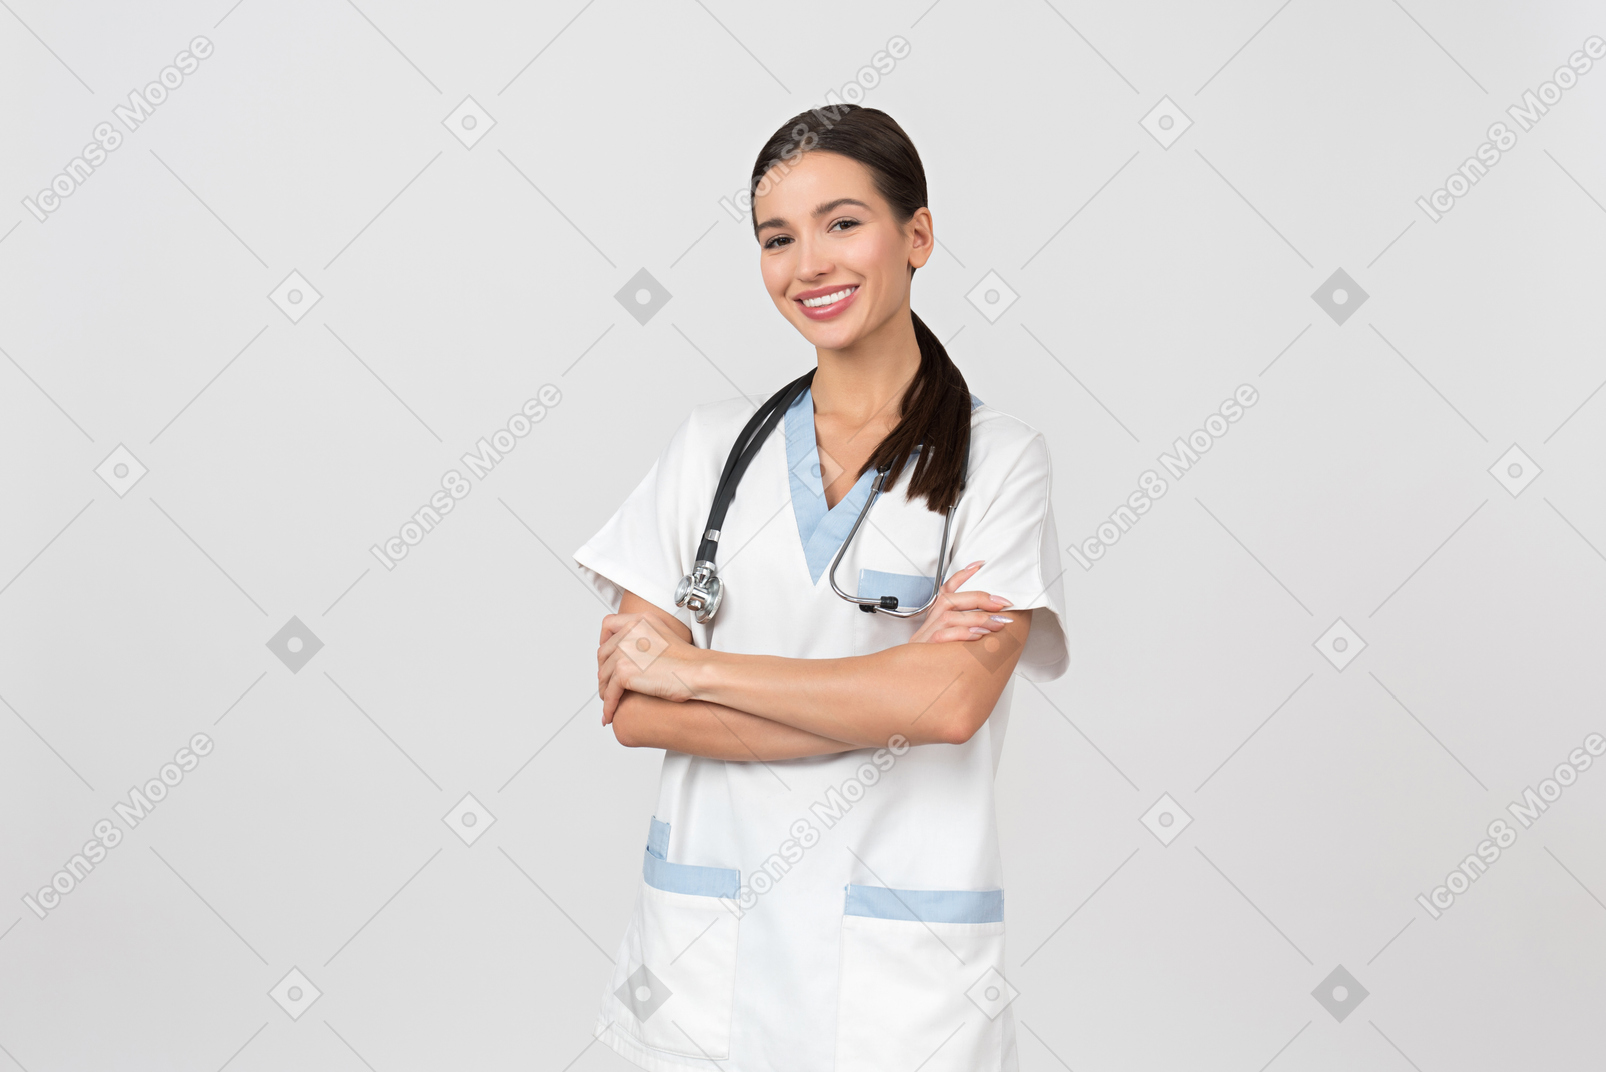 Smiling young female doctor standing with her hands crossed